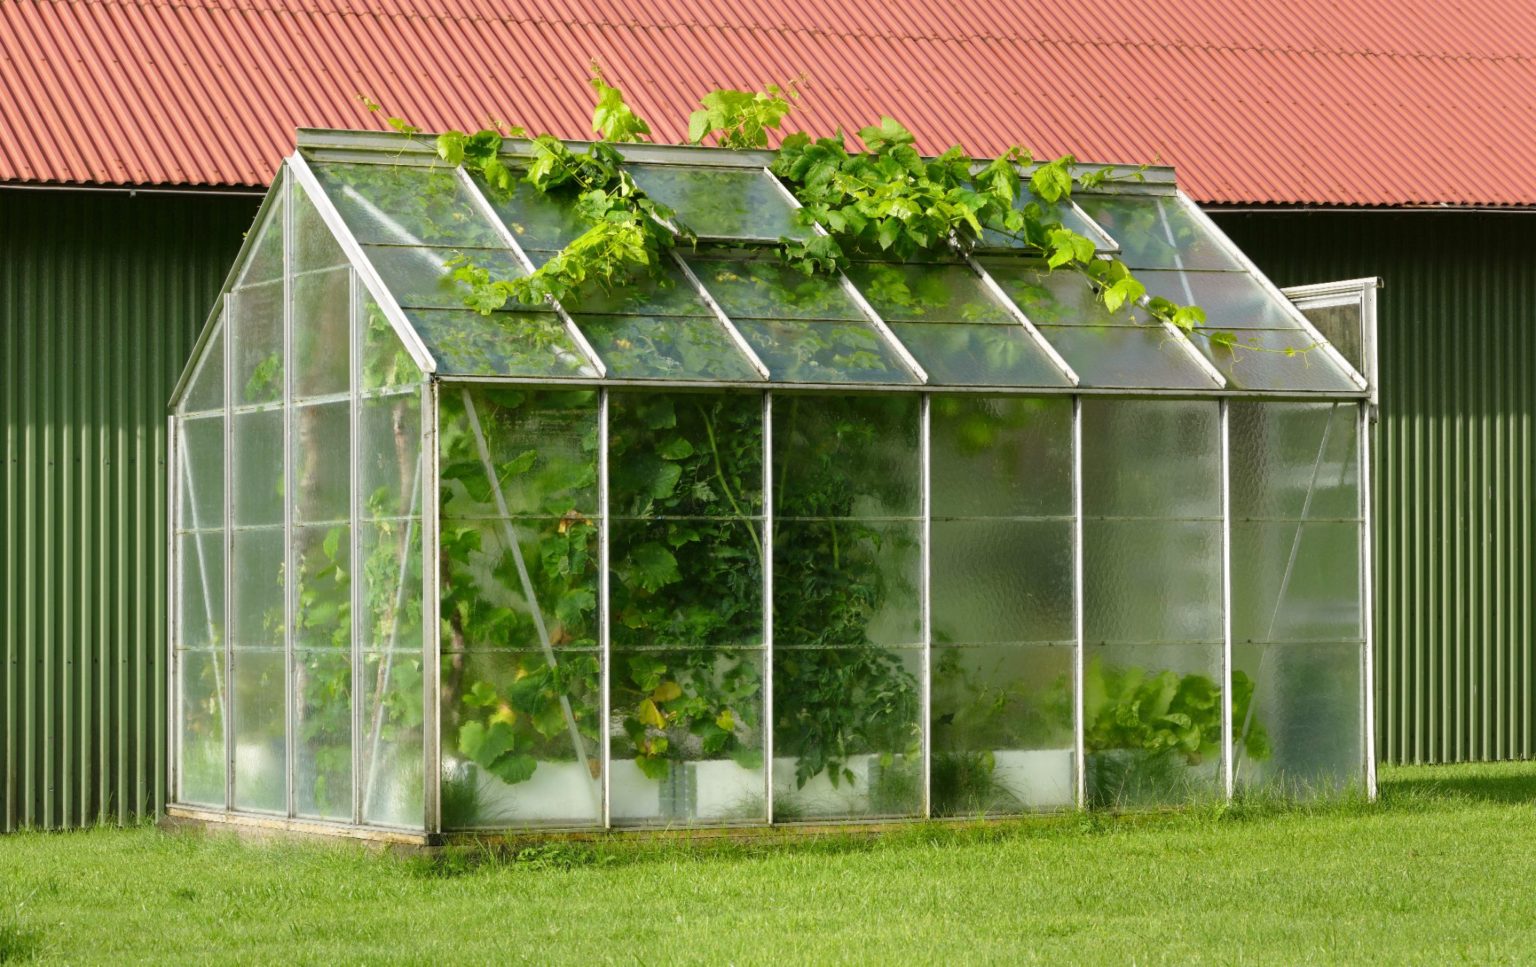 Greenhouse Flooring - How To Get The Best Greenhouse Flooring